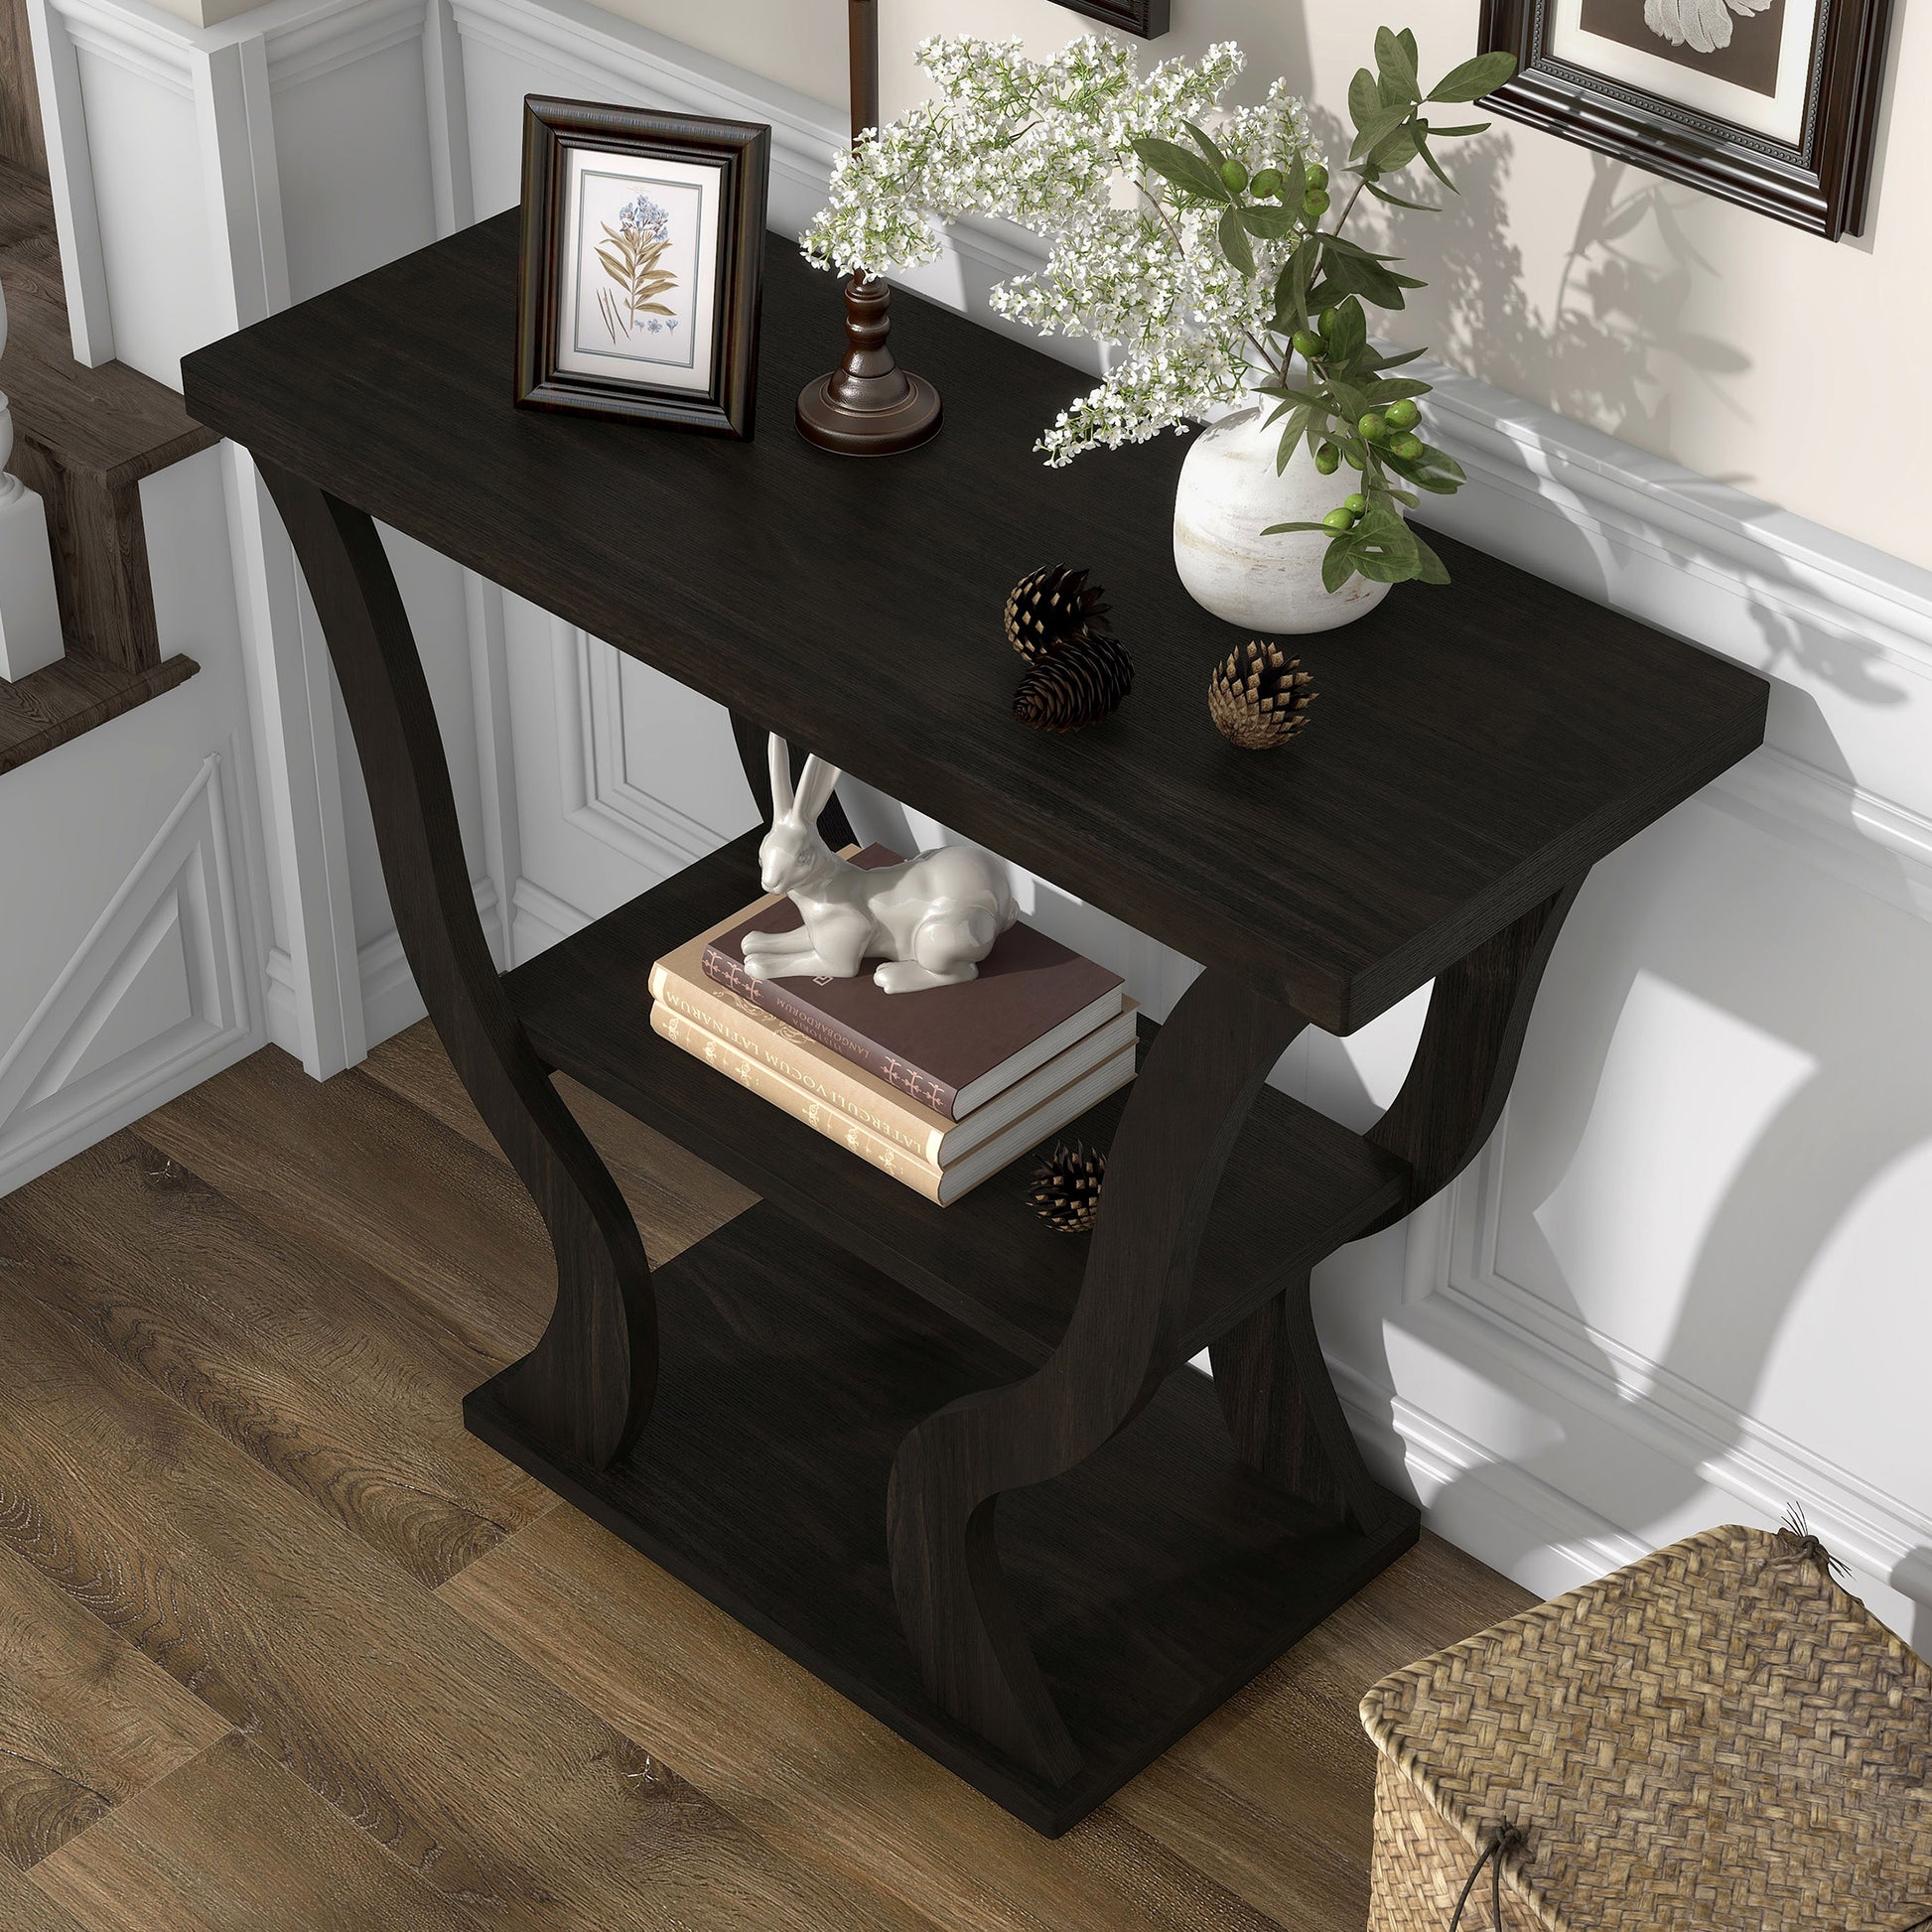 Left angled bird's eye view of a transitional espresso curvy console table in a living area with accessories